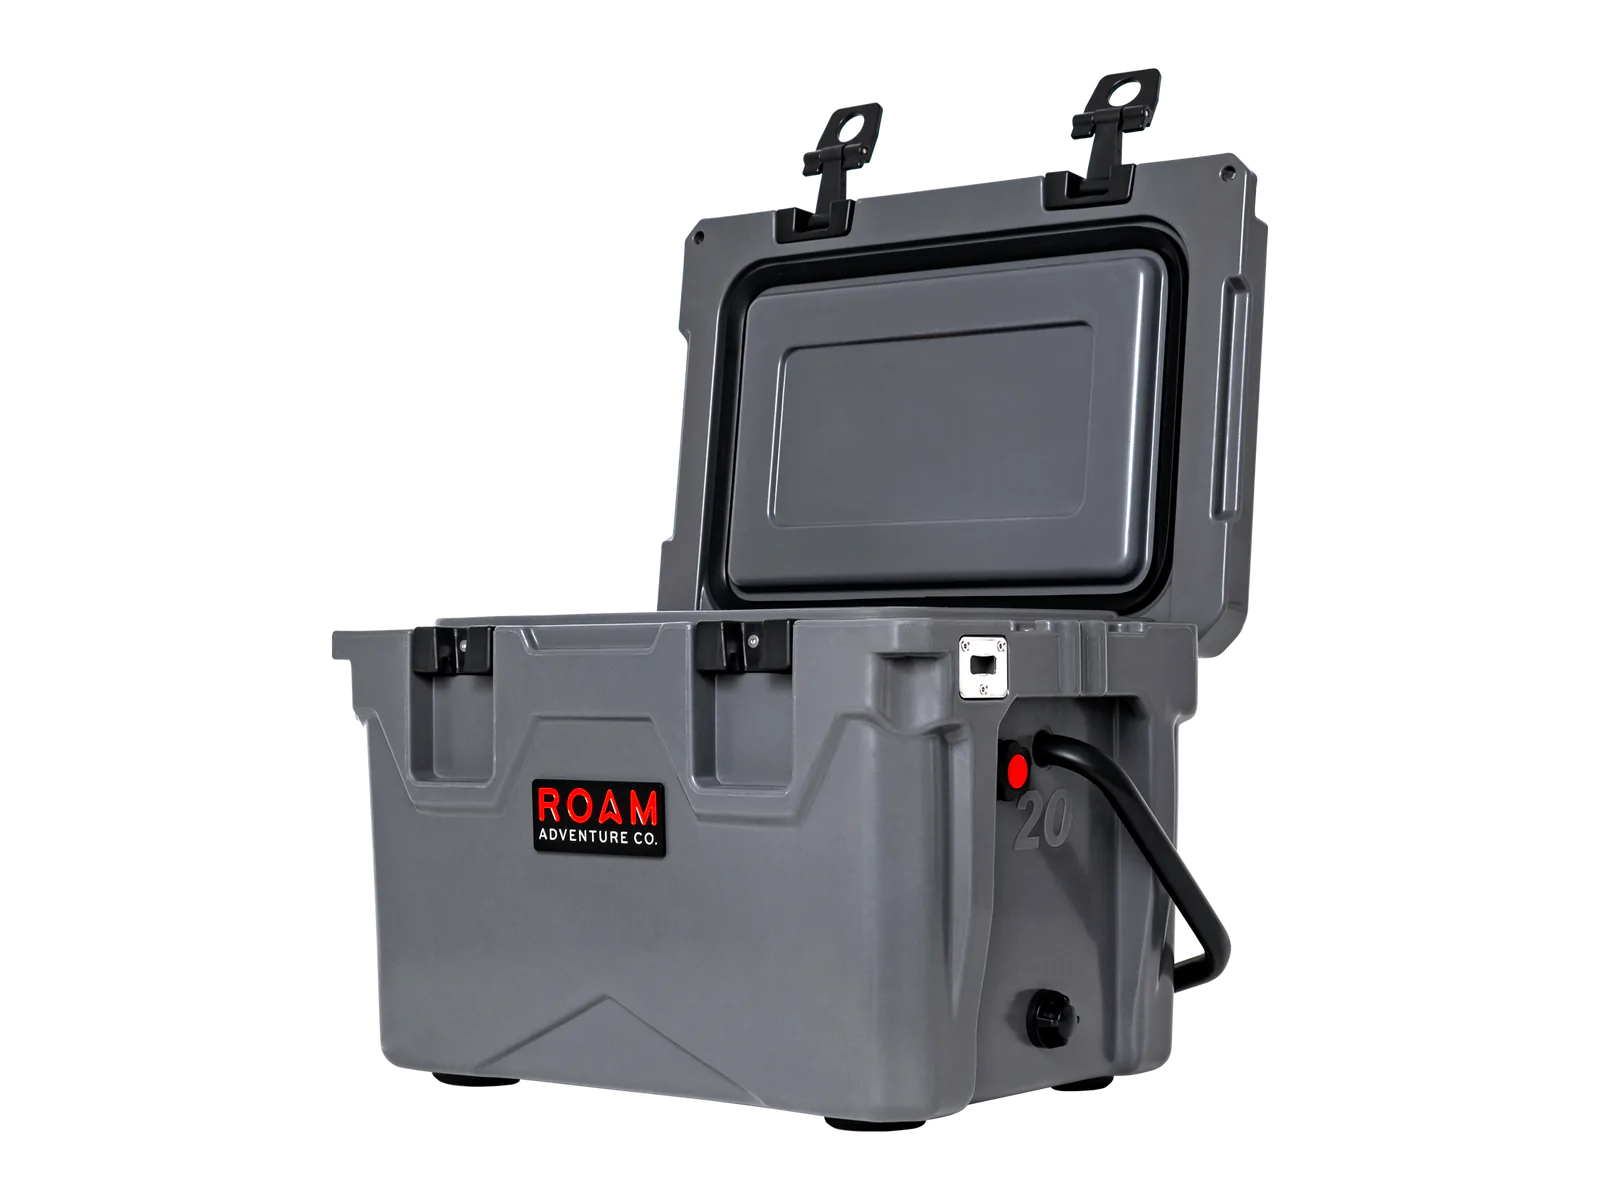 roam adventure co rugged icechest cooler for sale near waco texas at hawkes outdoors 2102512882